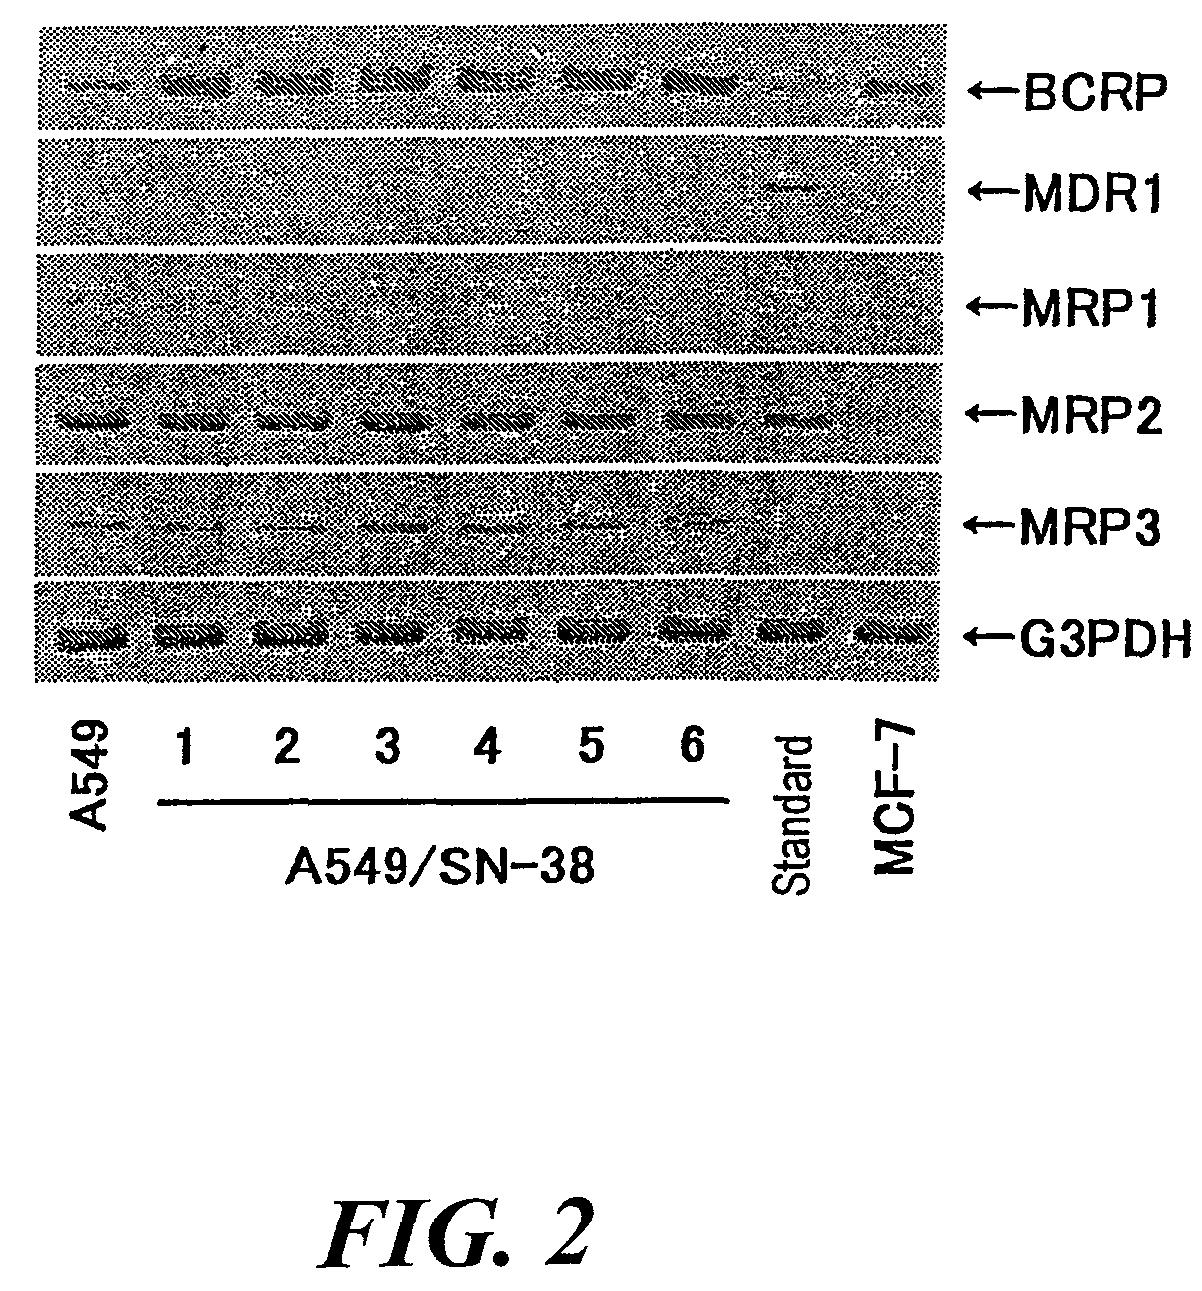 Breast cancer resistance protein (<i>BCRP</i>) inhibitor